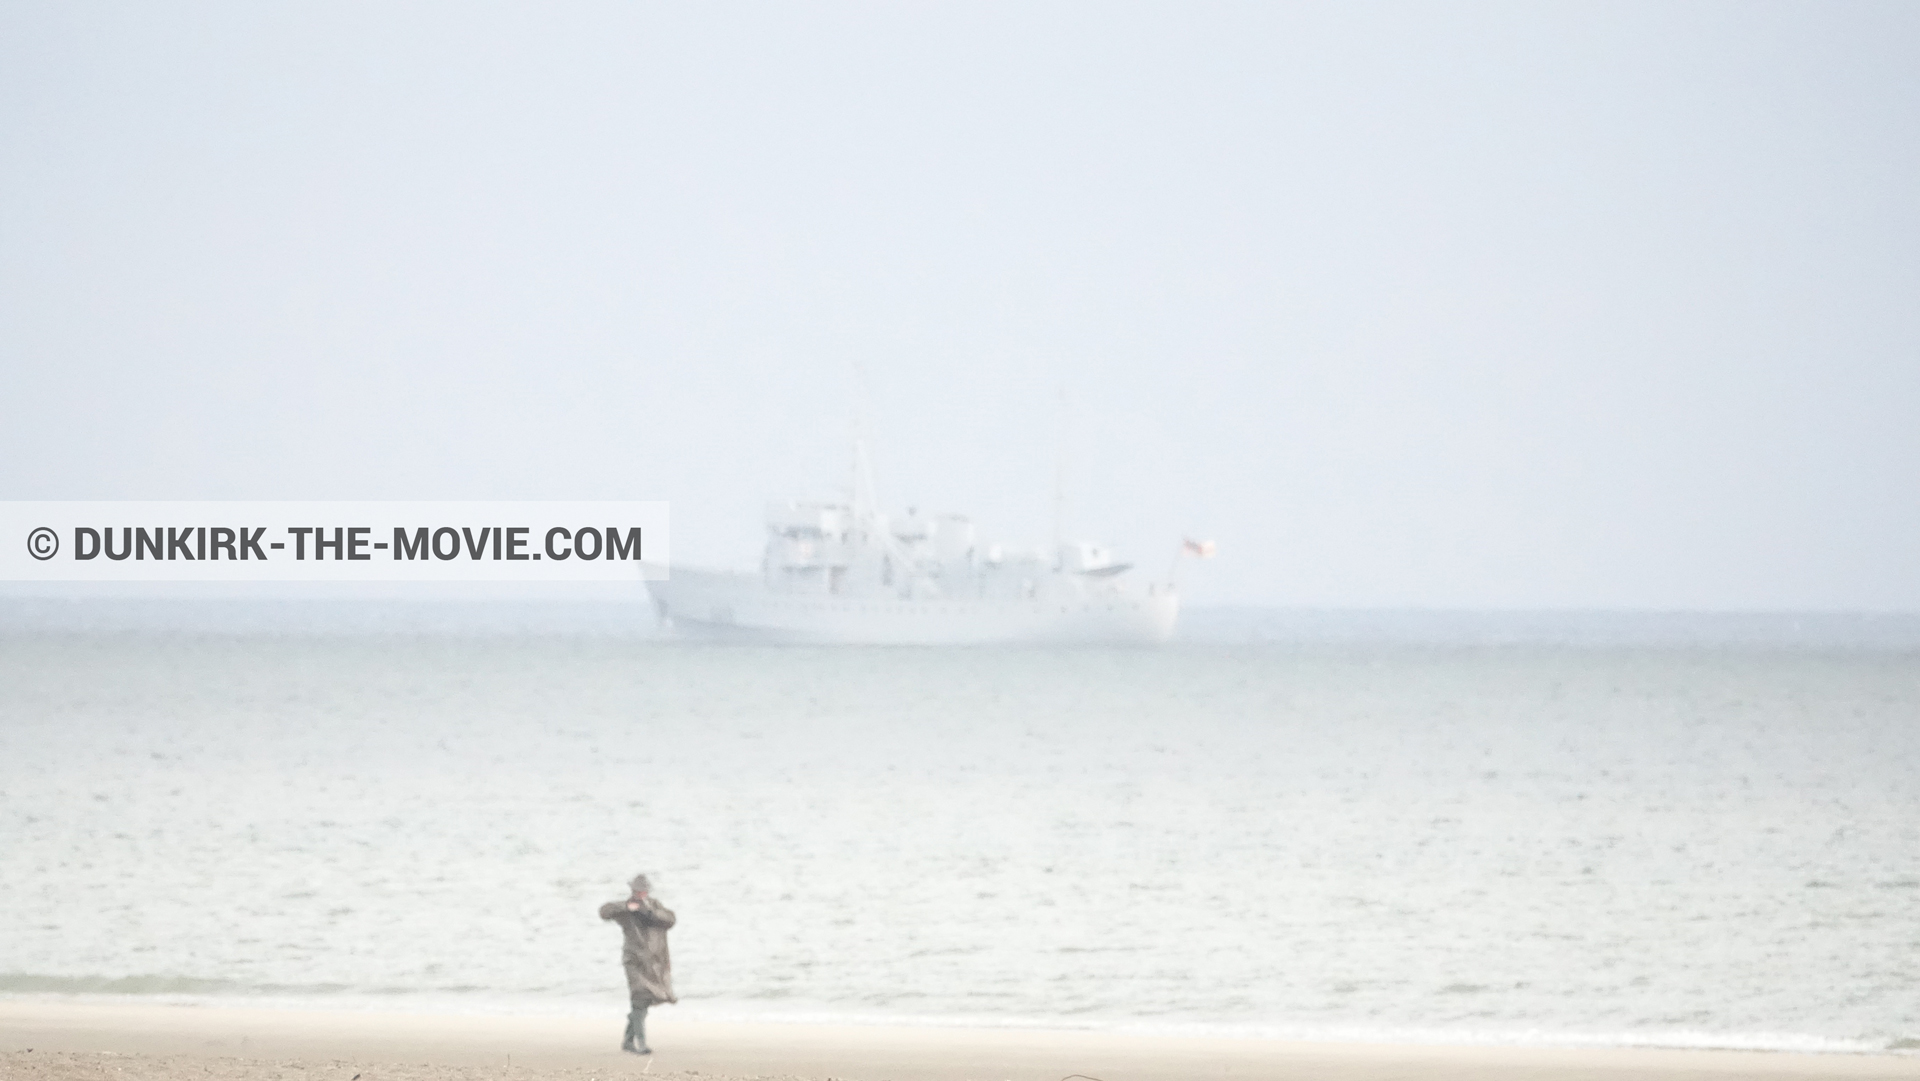 Picture with boat, supernumeraries, H11 - MLV Castor, beach,  from behind the scene of the Dunkirk movie by Nolan